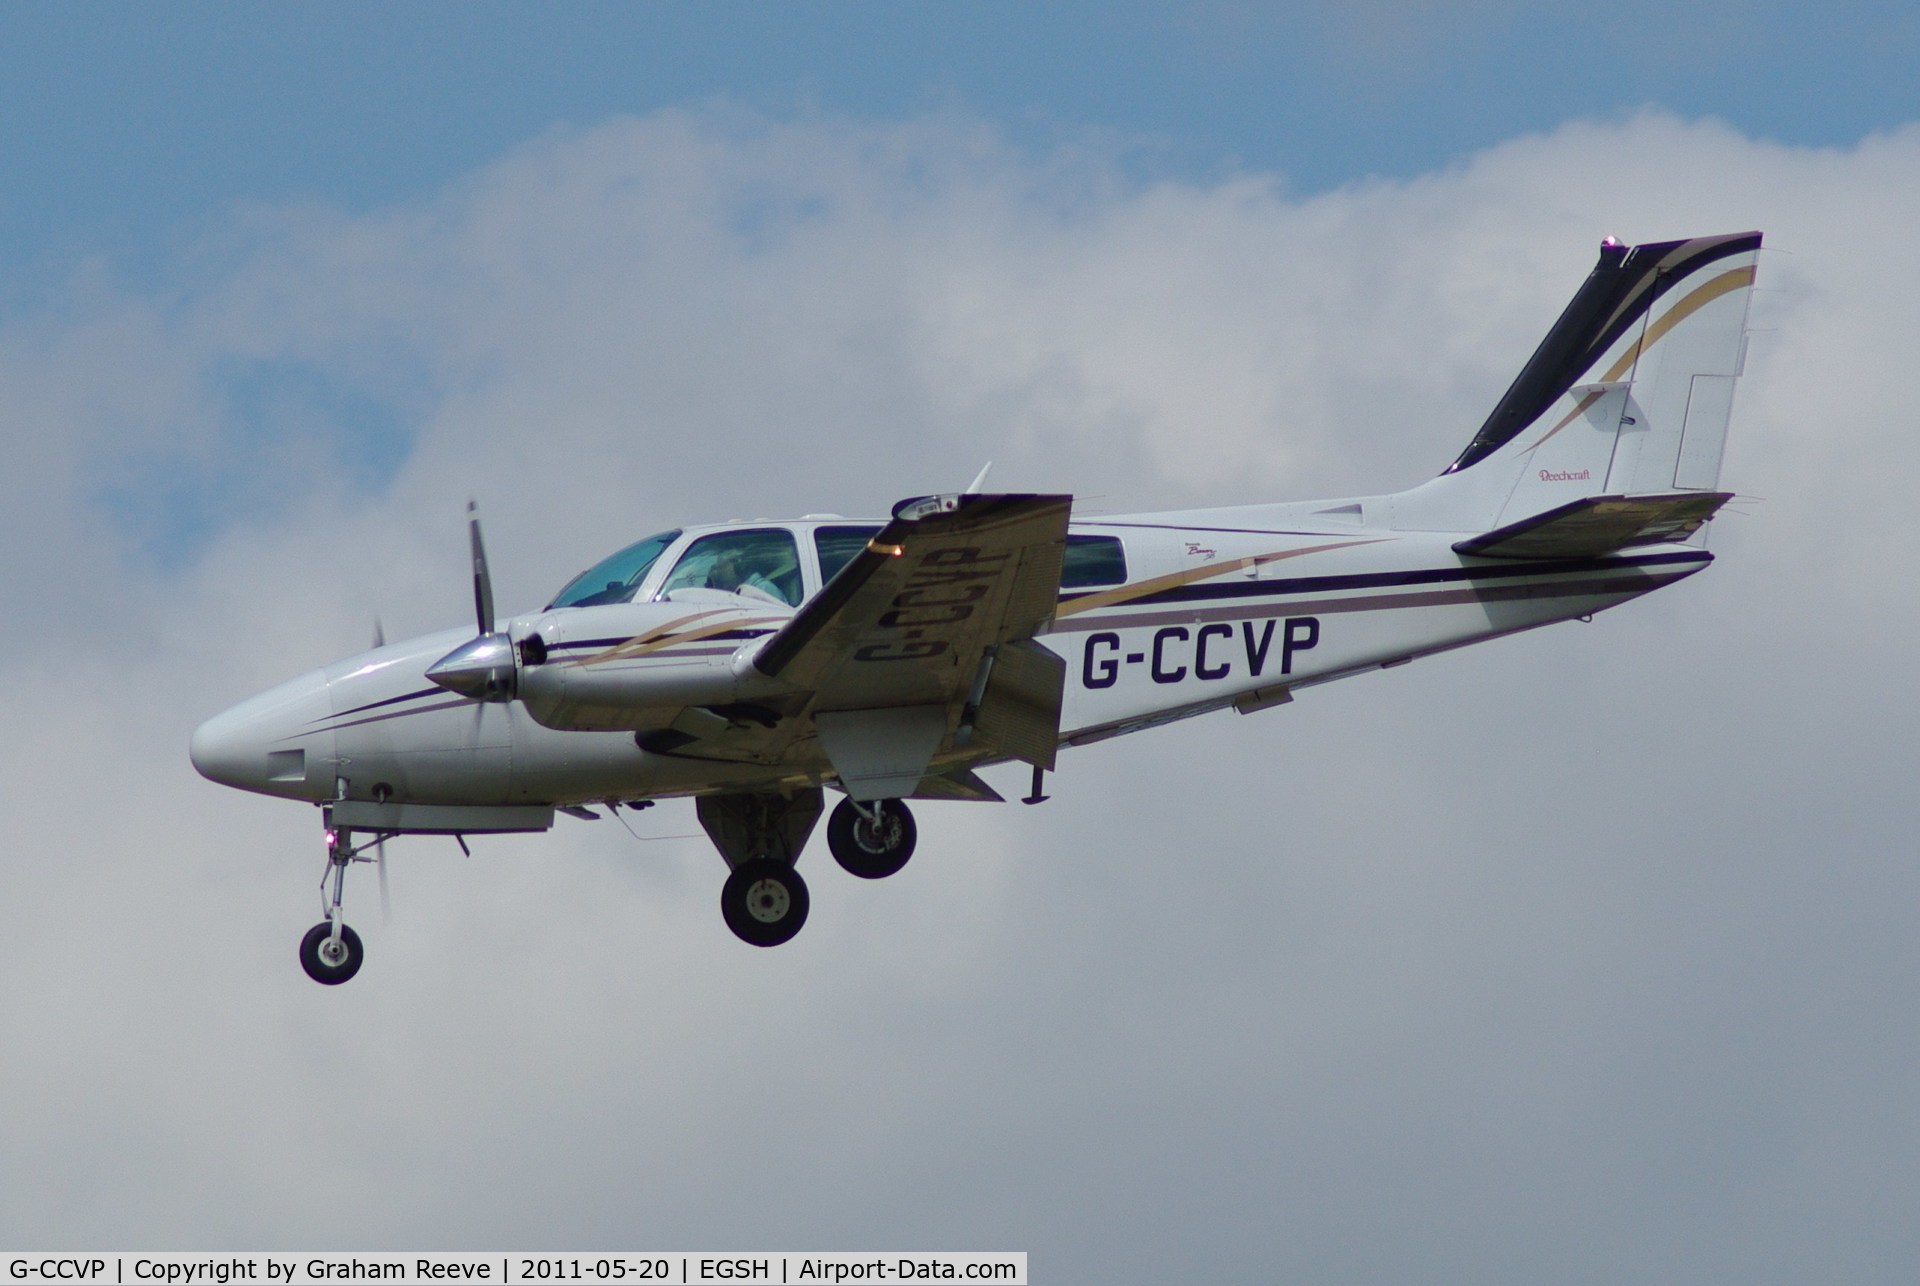 G-CCVP, 2000 Raytheon Aircraft Company 58 C/N TH-1948, About to land.